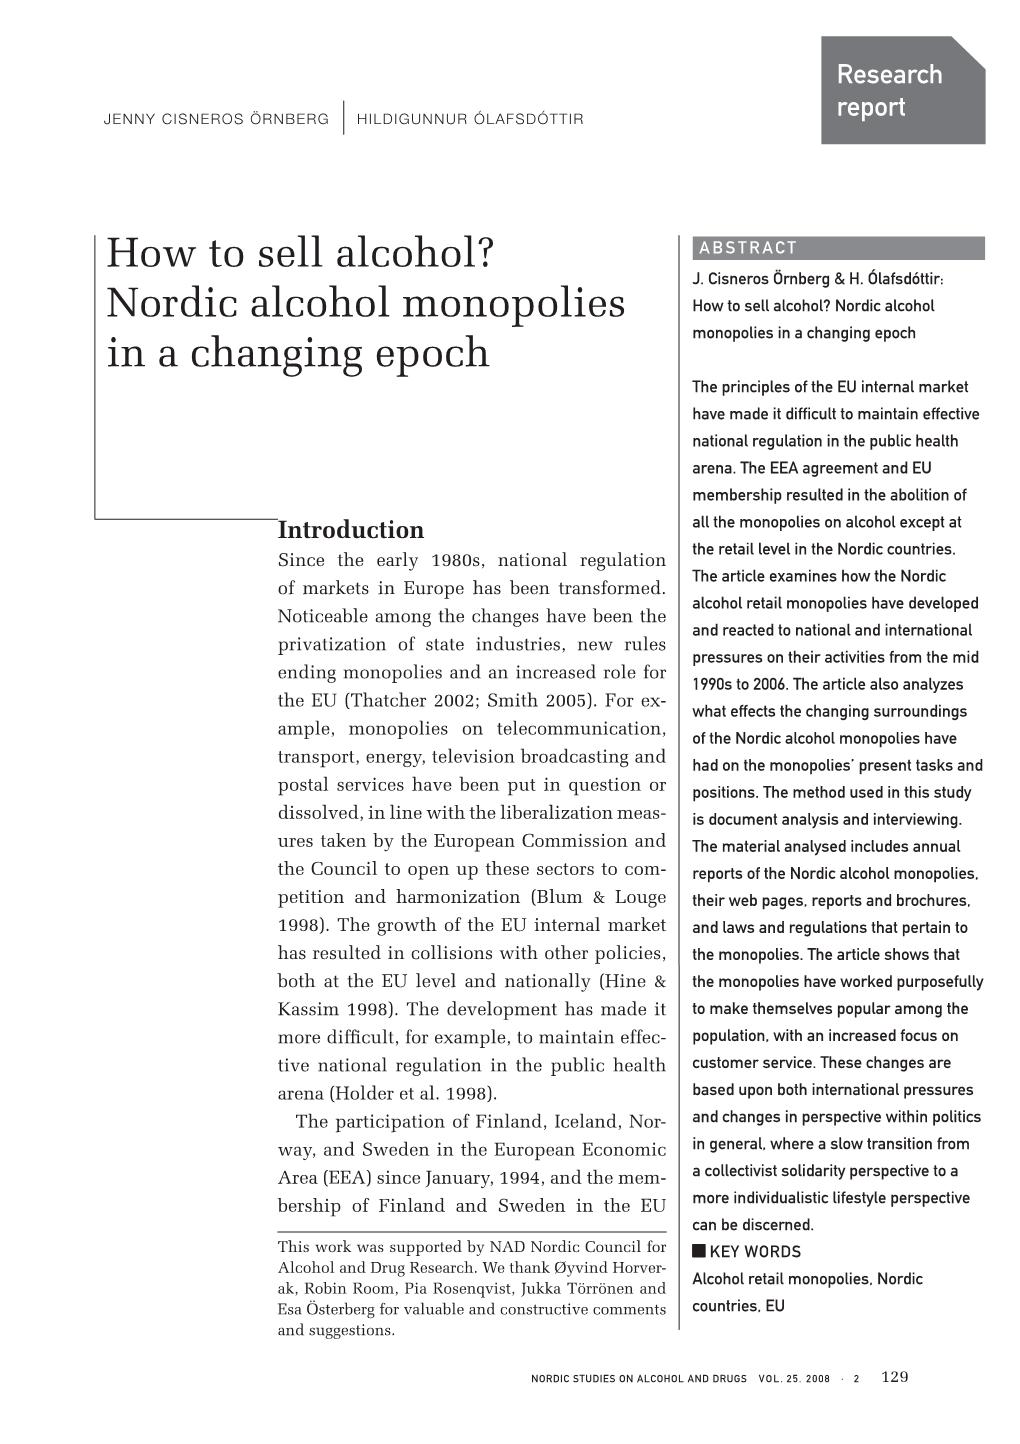 How to Sell Alcohol? ABSTRACT J